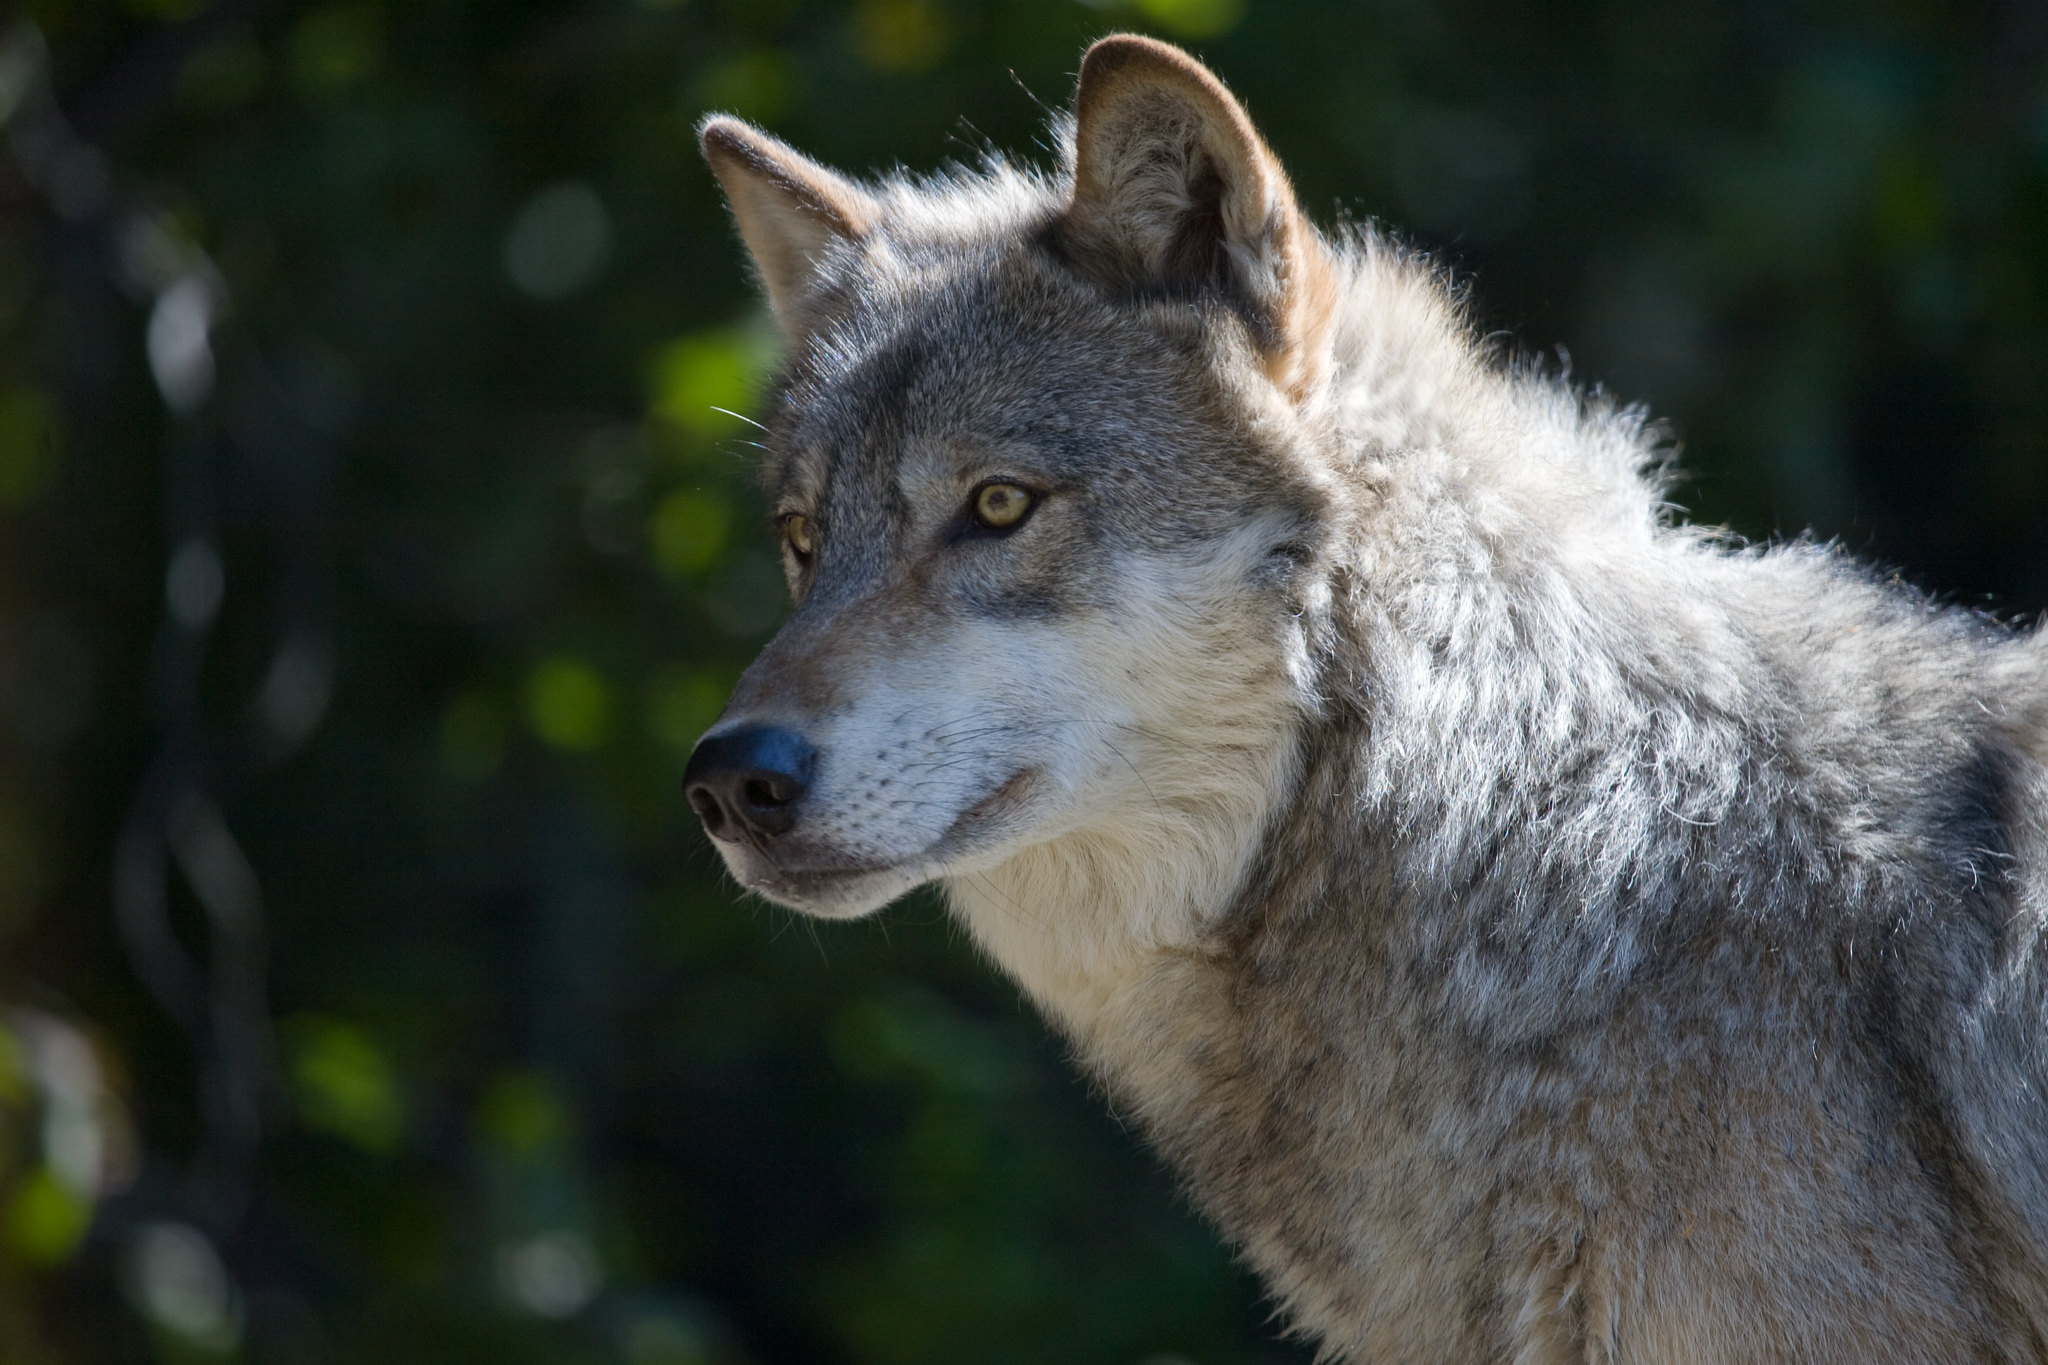 Baldwin pitches new approach to removing wolves from endangered species list